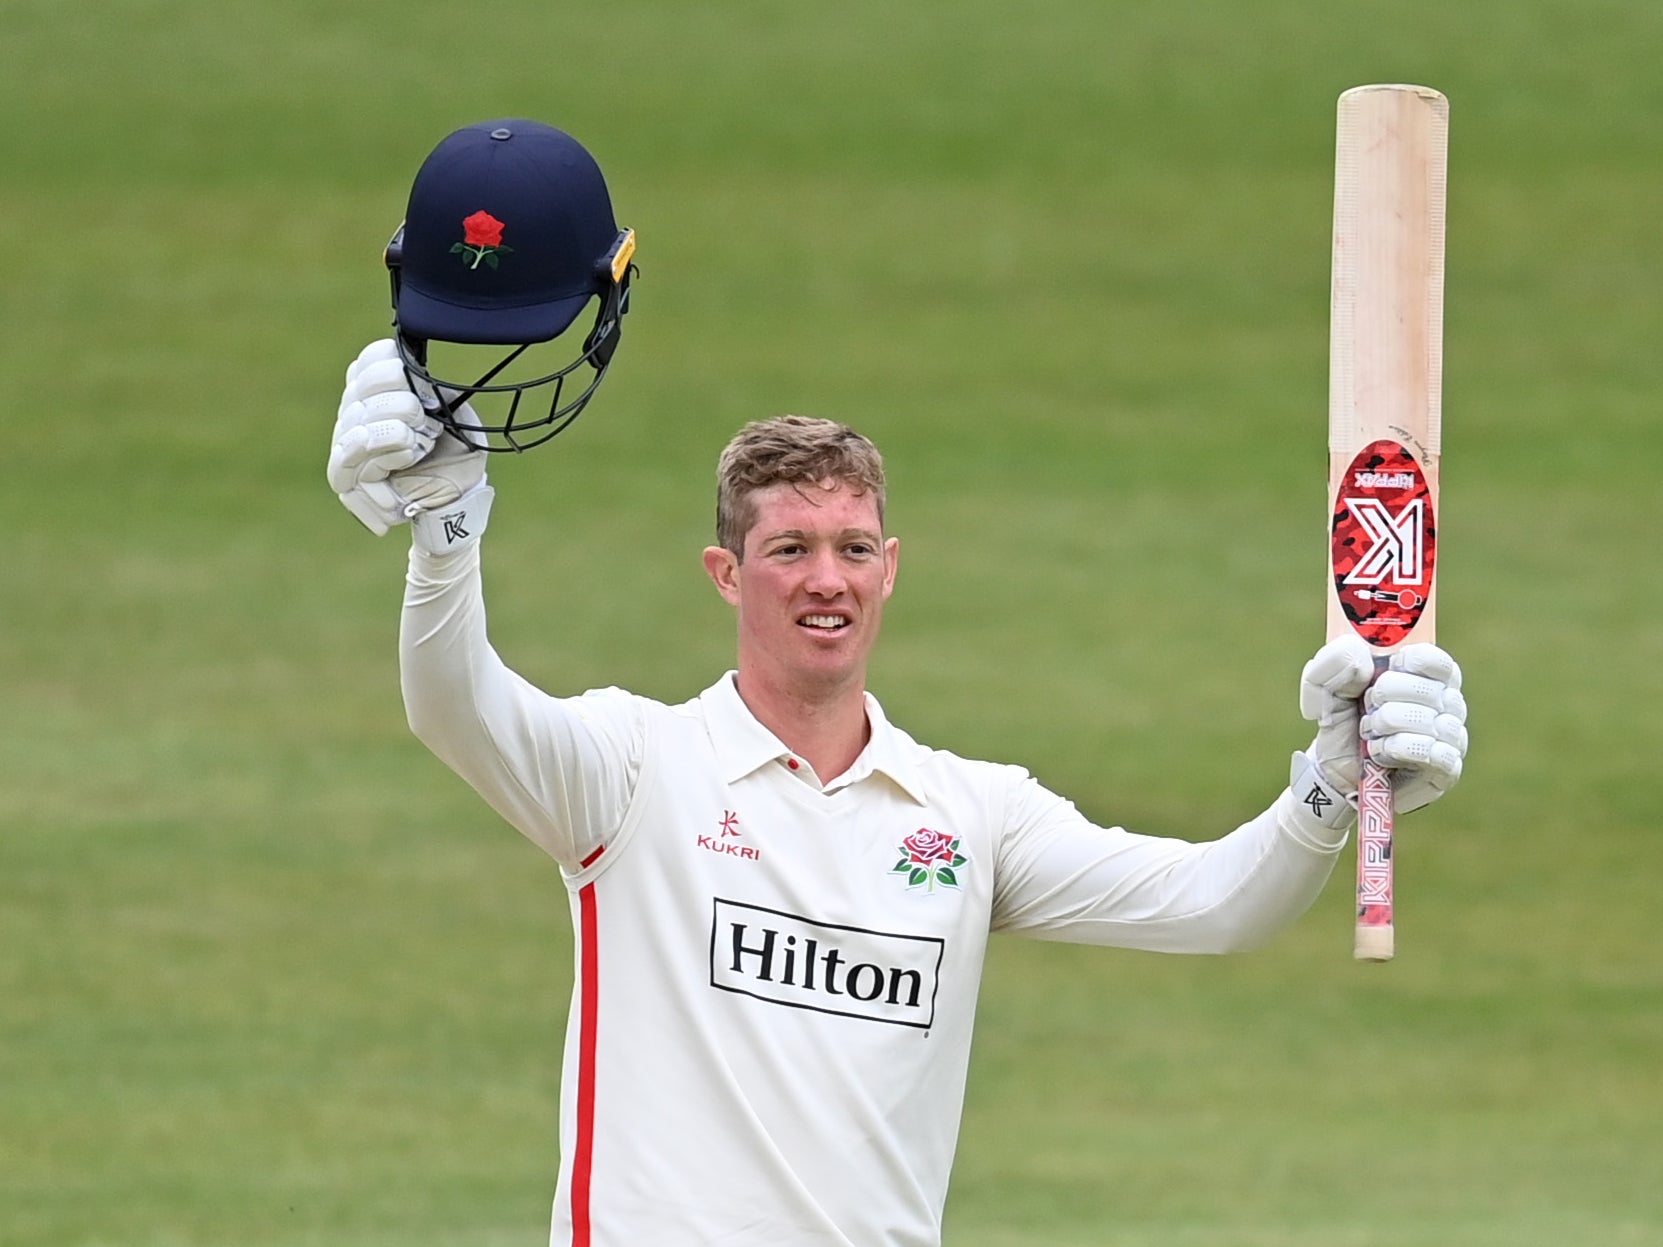 The Lancashire opener has averaged over 75 with five hundreds this season